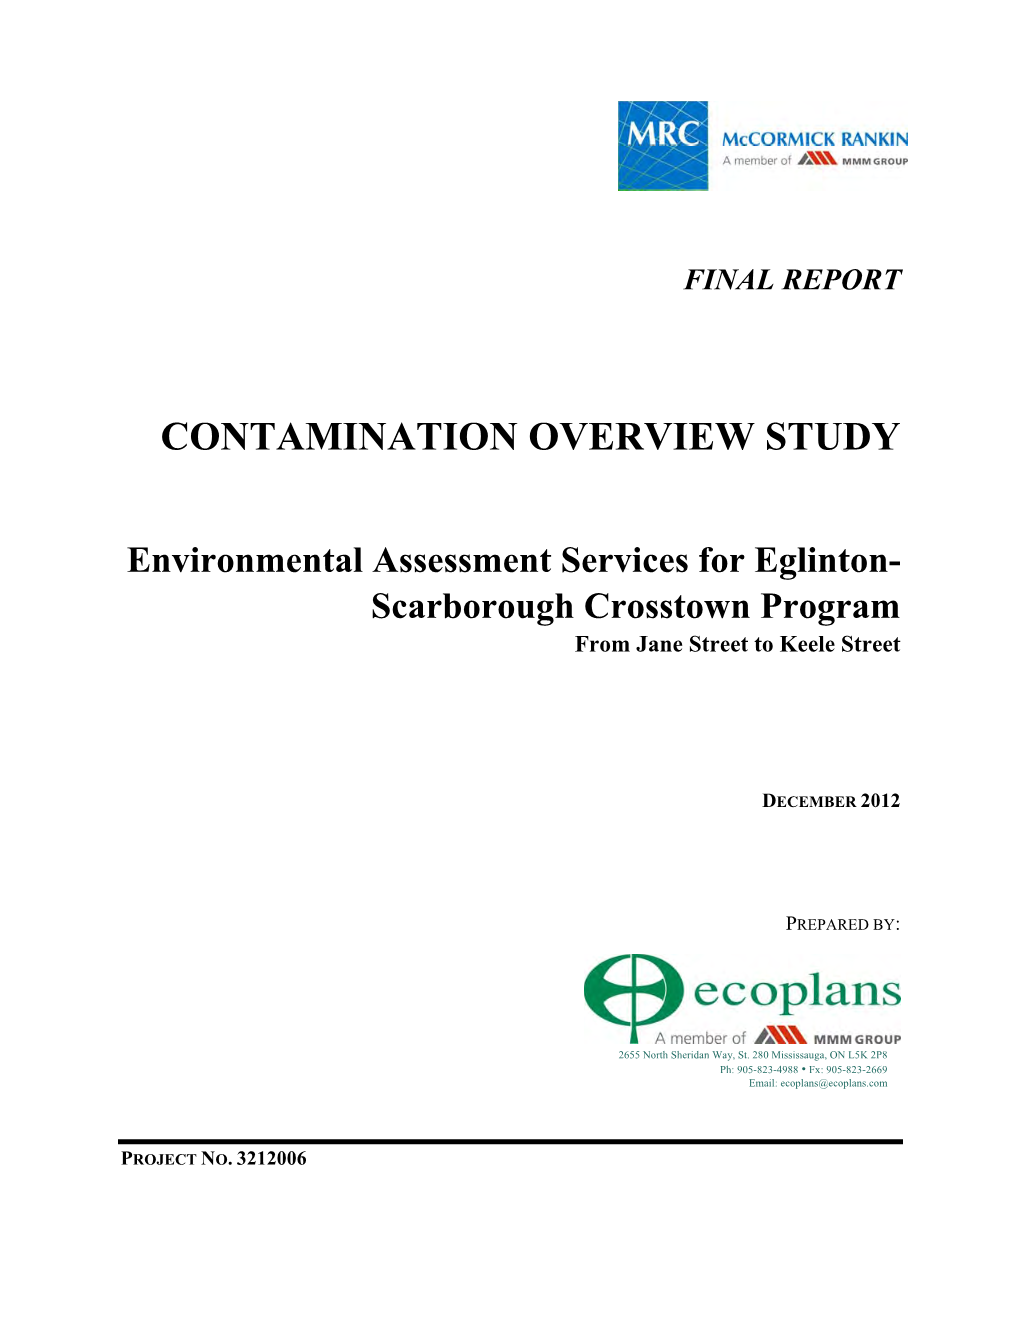 Contamination Overview Study